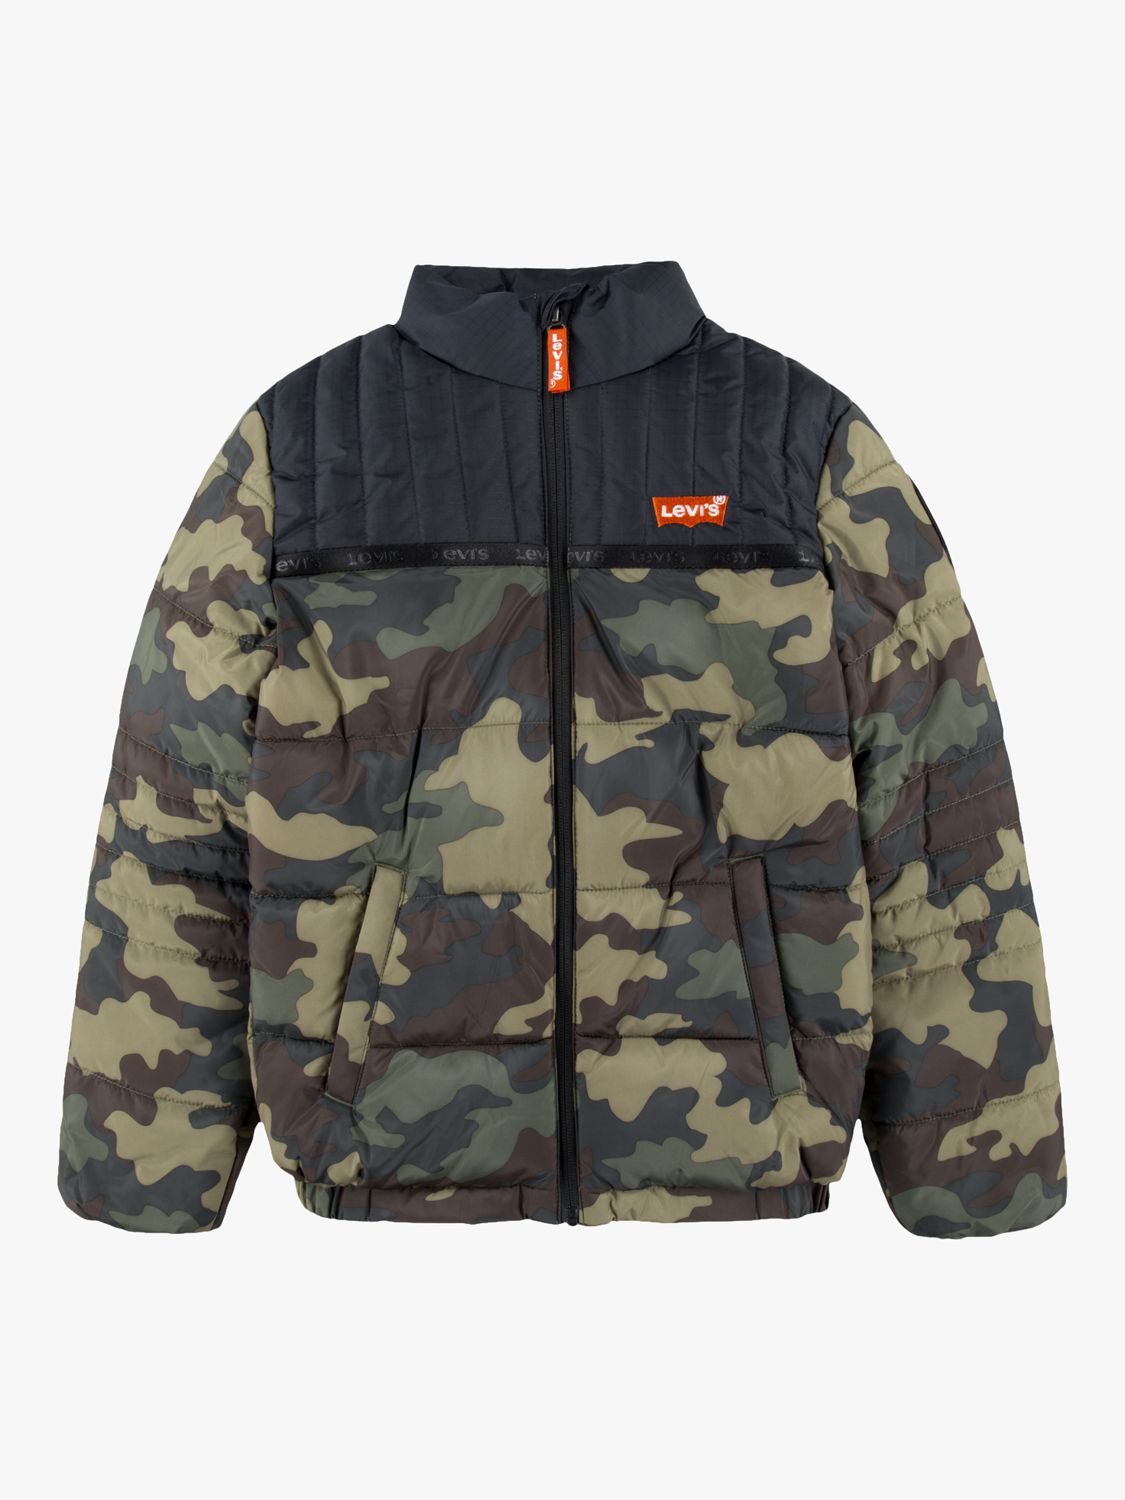 Levi's Kids' Camo Quilted Jacket, Black/Green